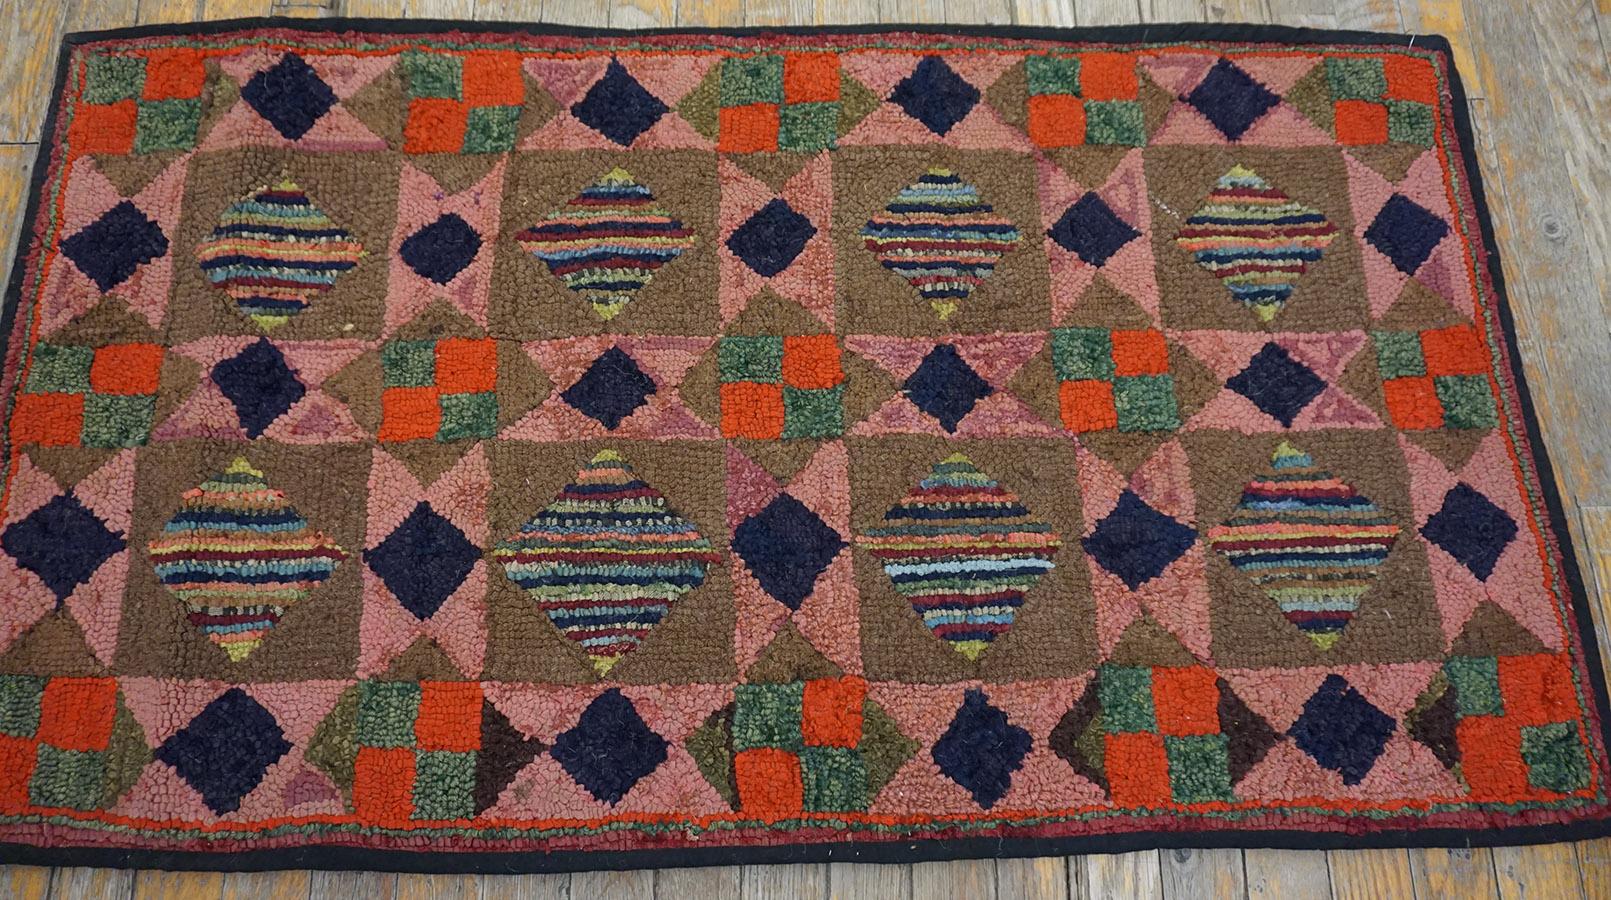 Antique American hooked rug, size: 2'3